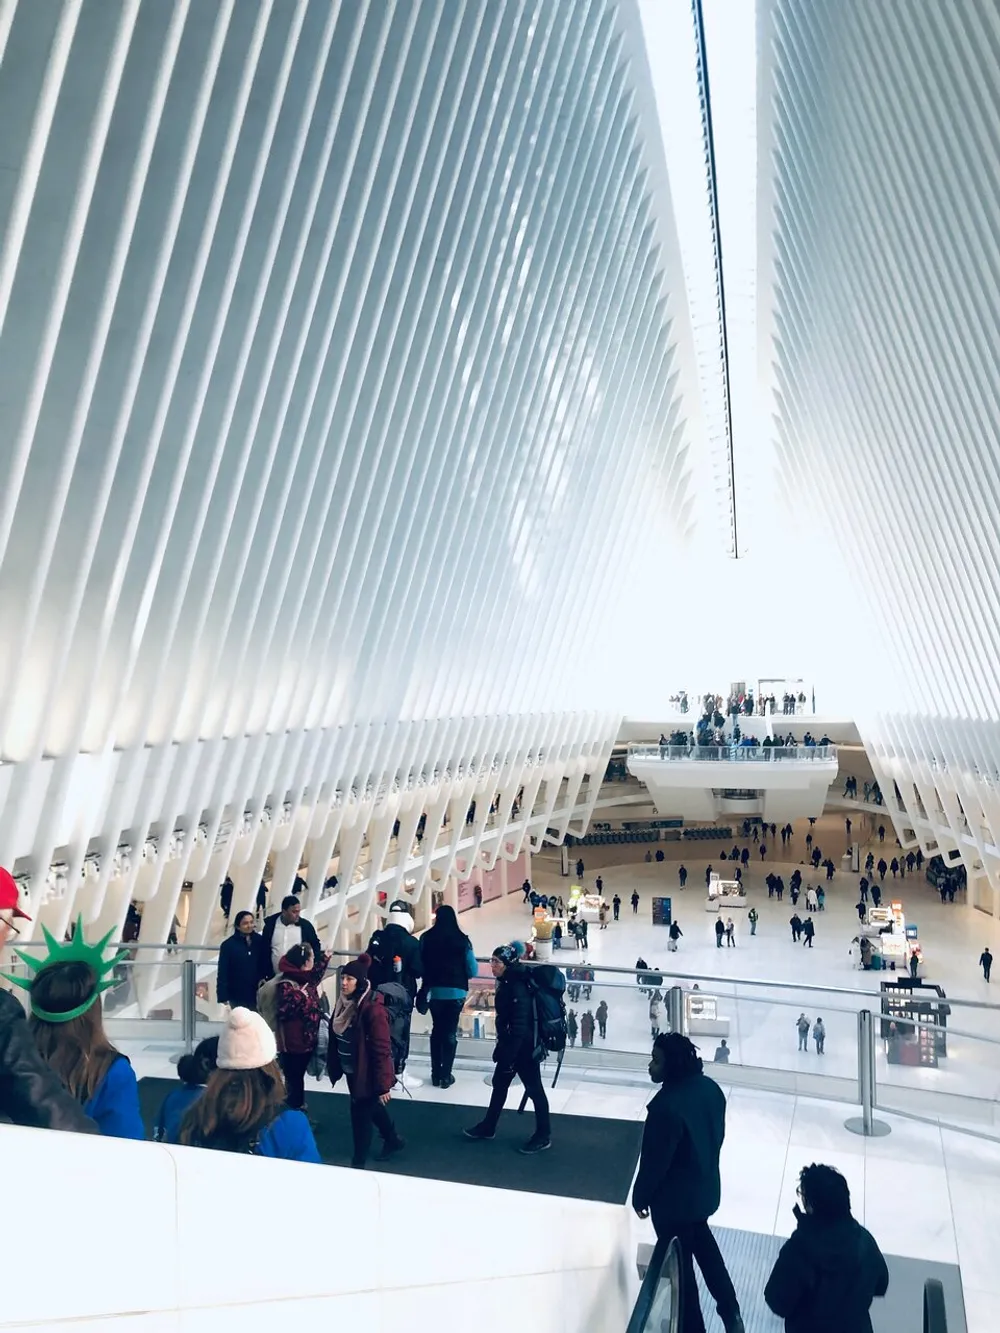 The image features a bustling interior view of the Oculus transportation hub in New York City displaying its distinctive white ribbed structure and people walking about